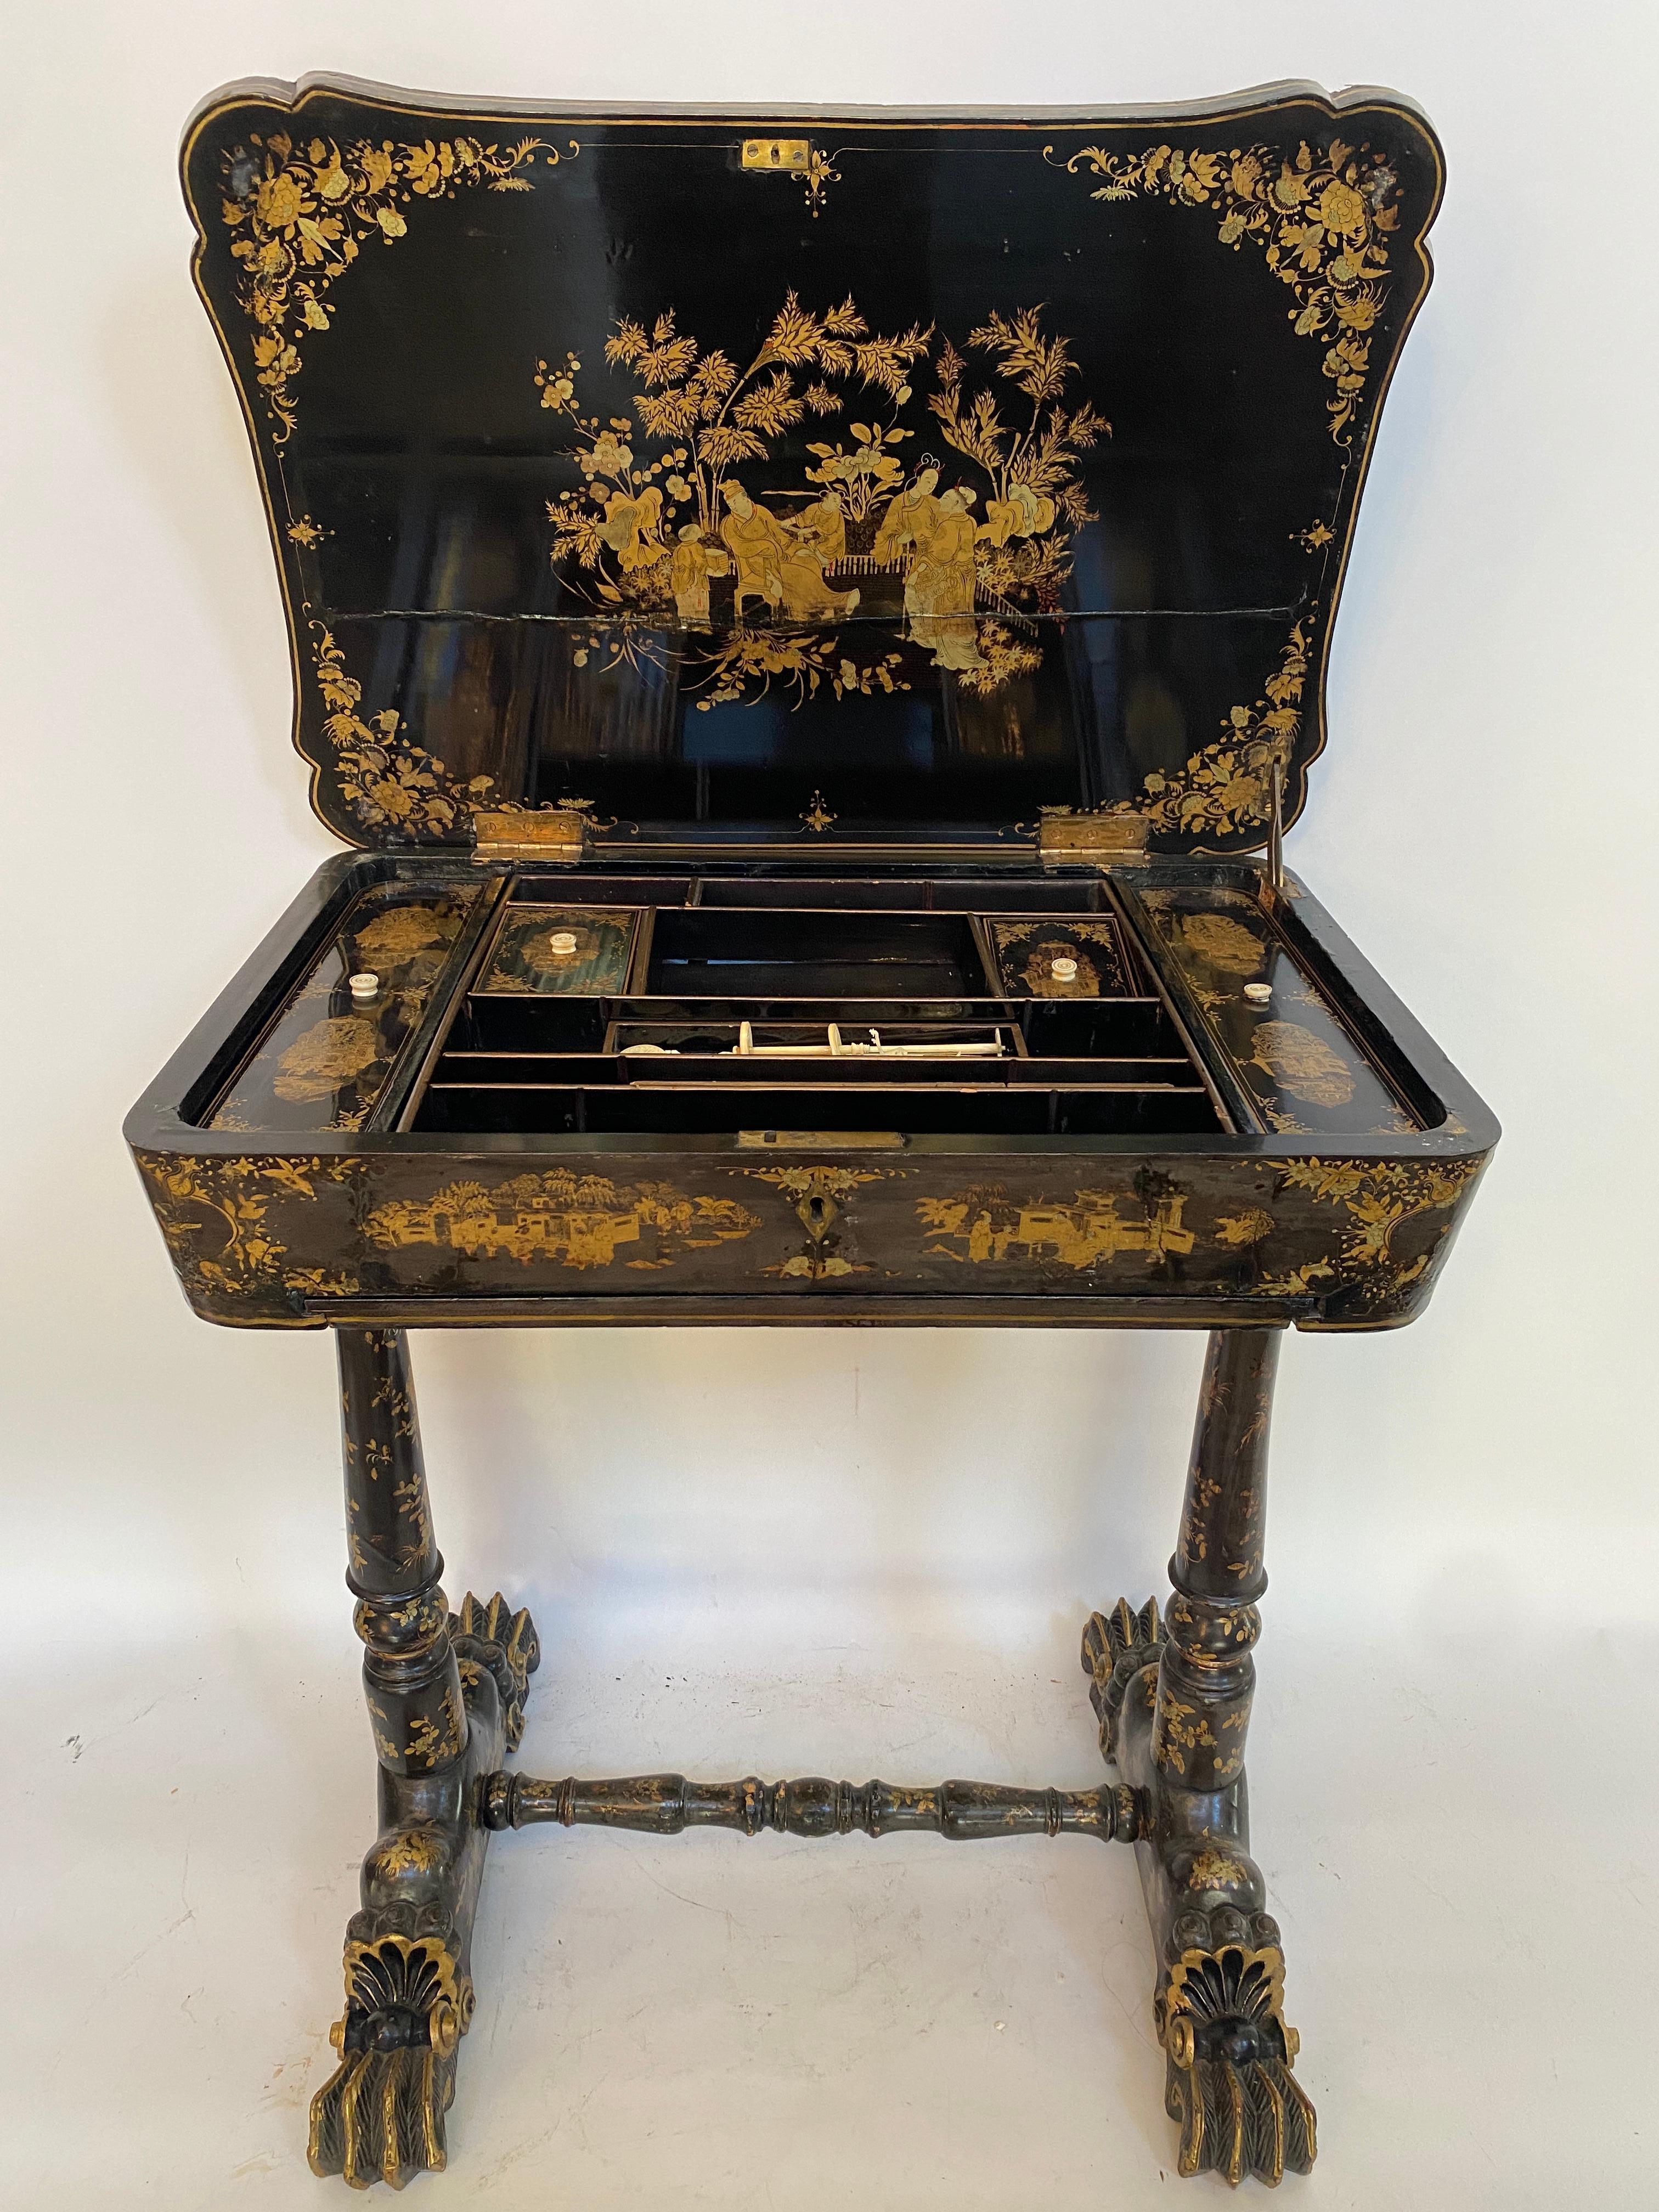 Early 19th Century Chinese Export Lacquer and Gilt Sew Working Table For Sale 1